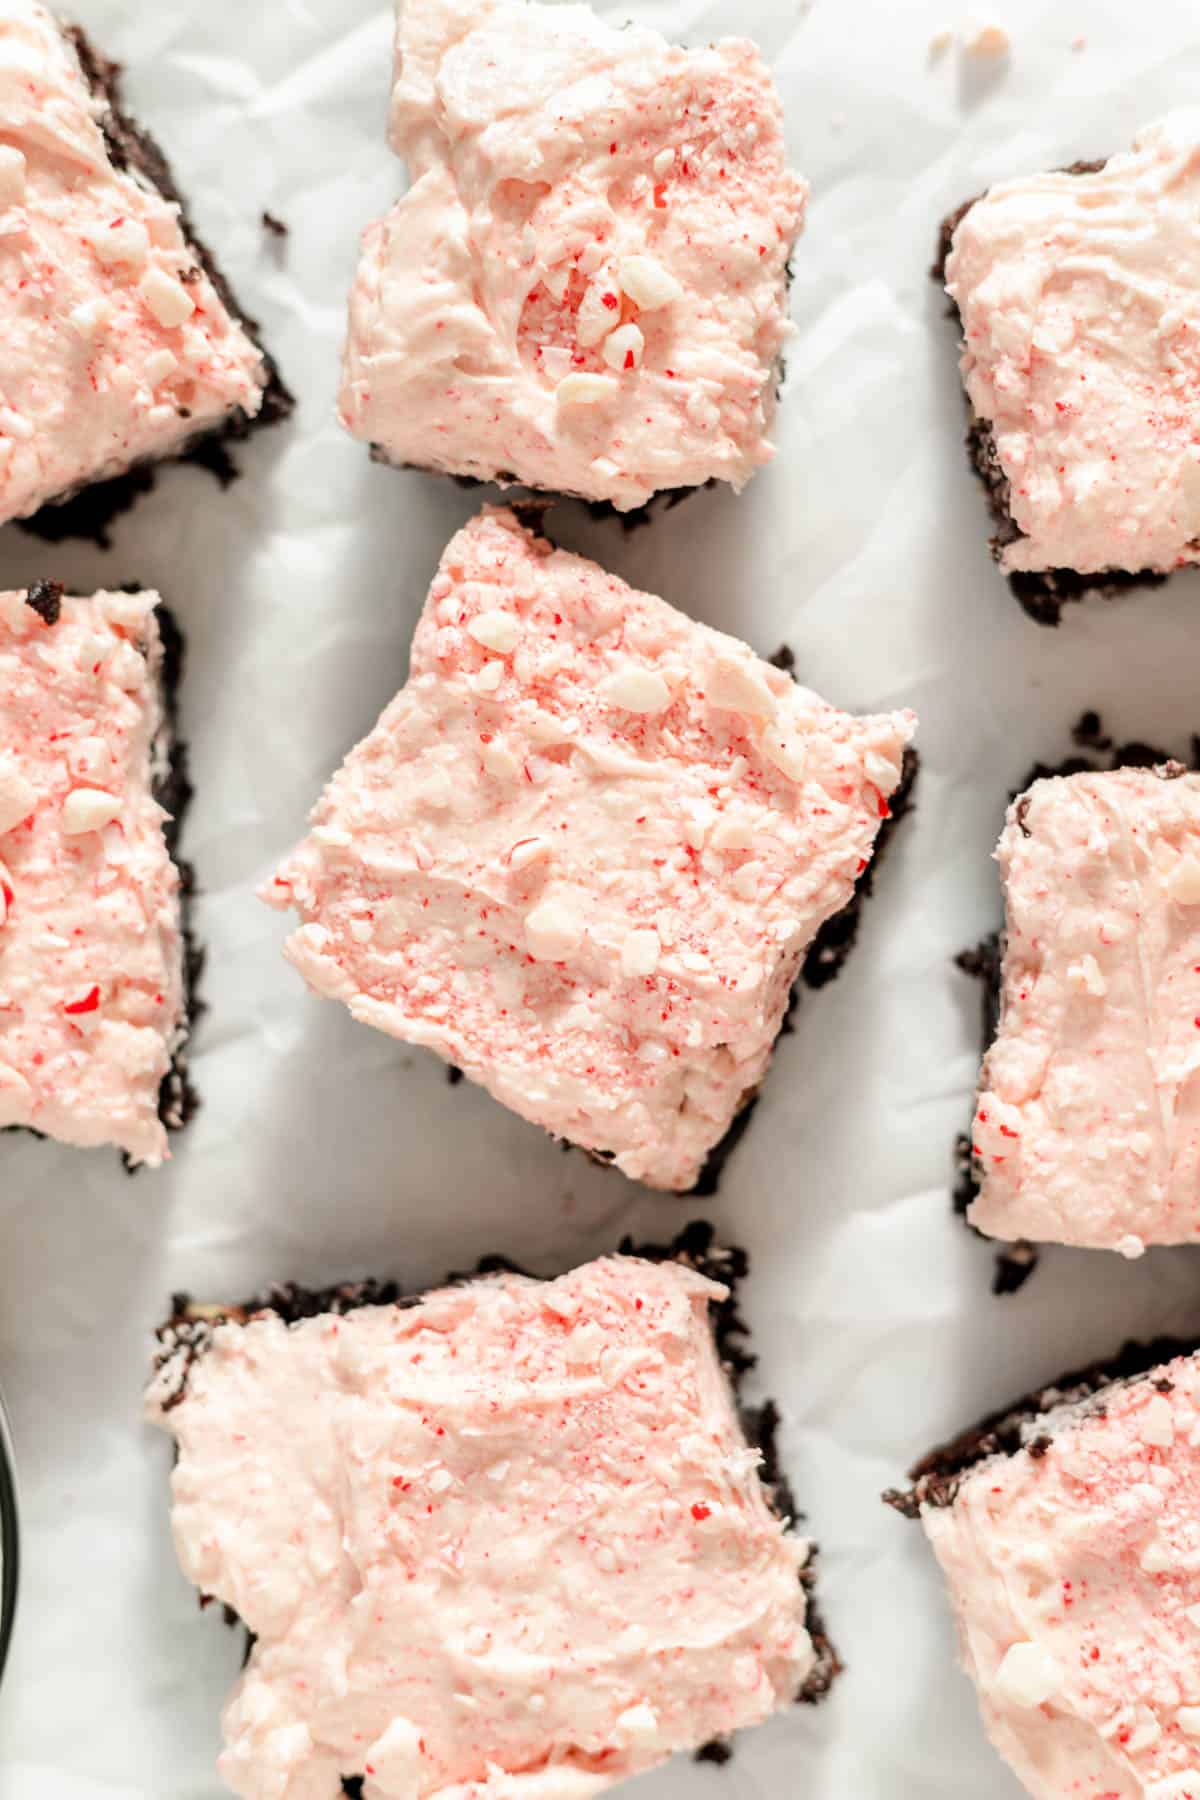 An image of brownies topped with peppermint frosting and crushed candy canes sprinkled on top.